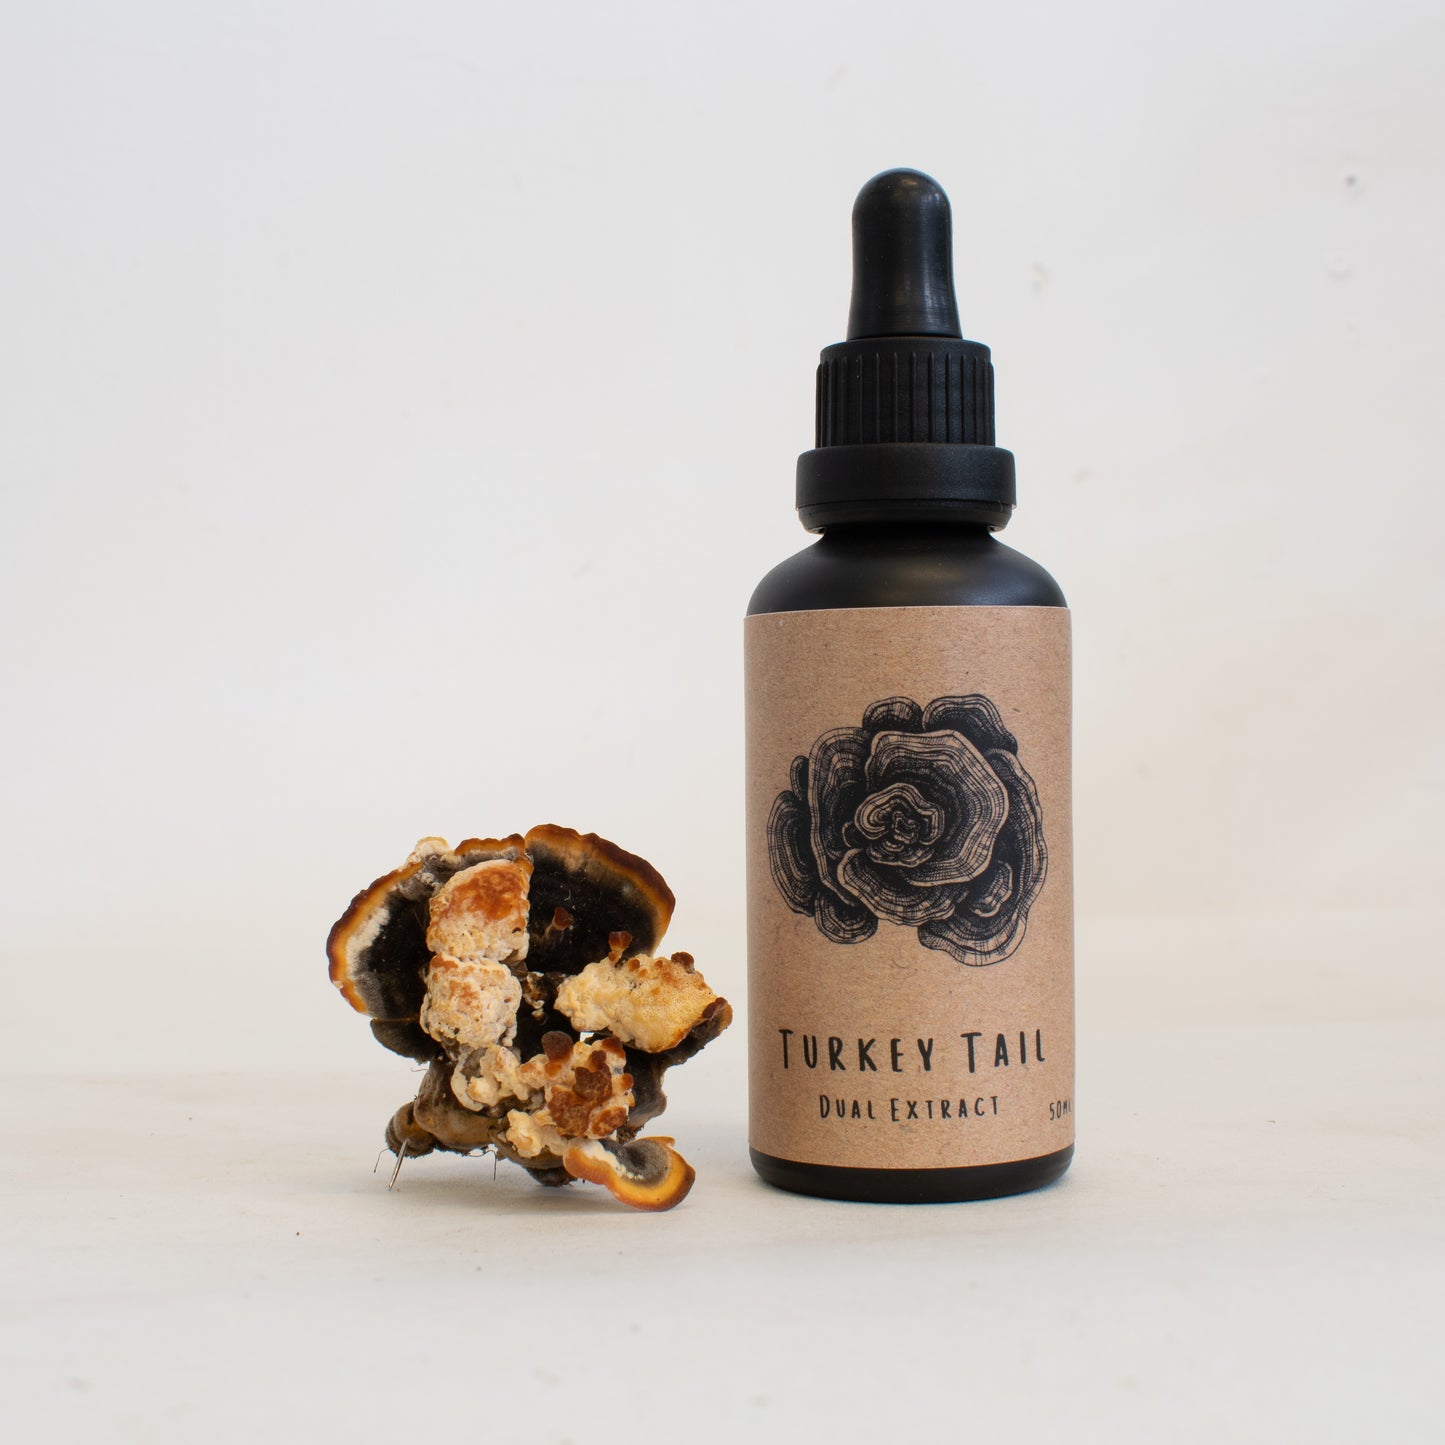 Tramates veersicolor dual-extract tincture made by Fat Fox Mushrooms.